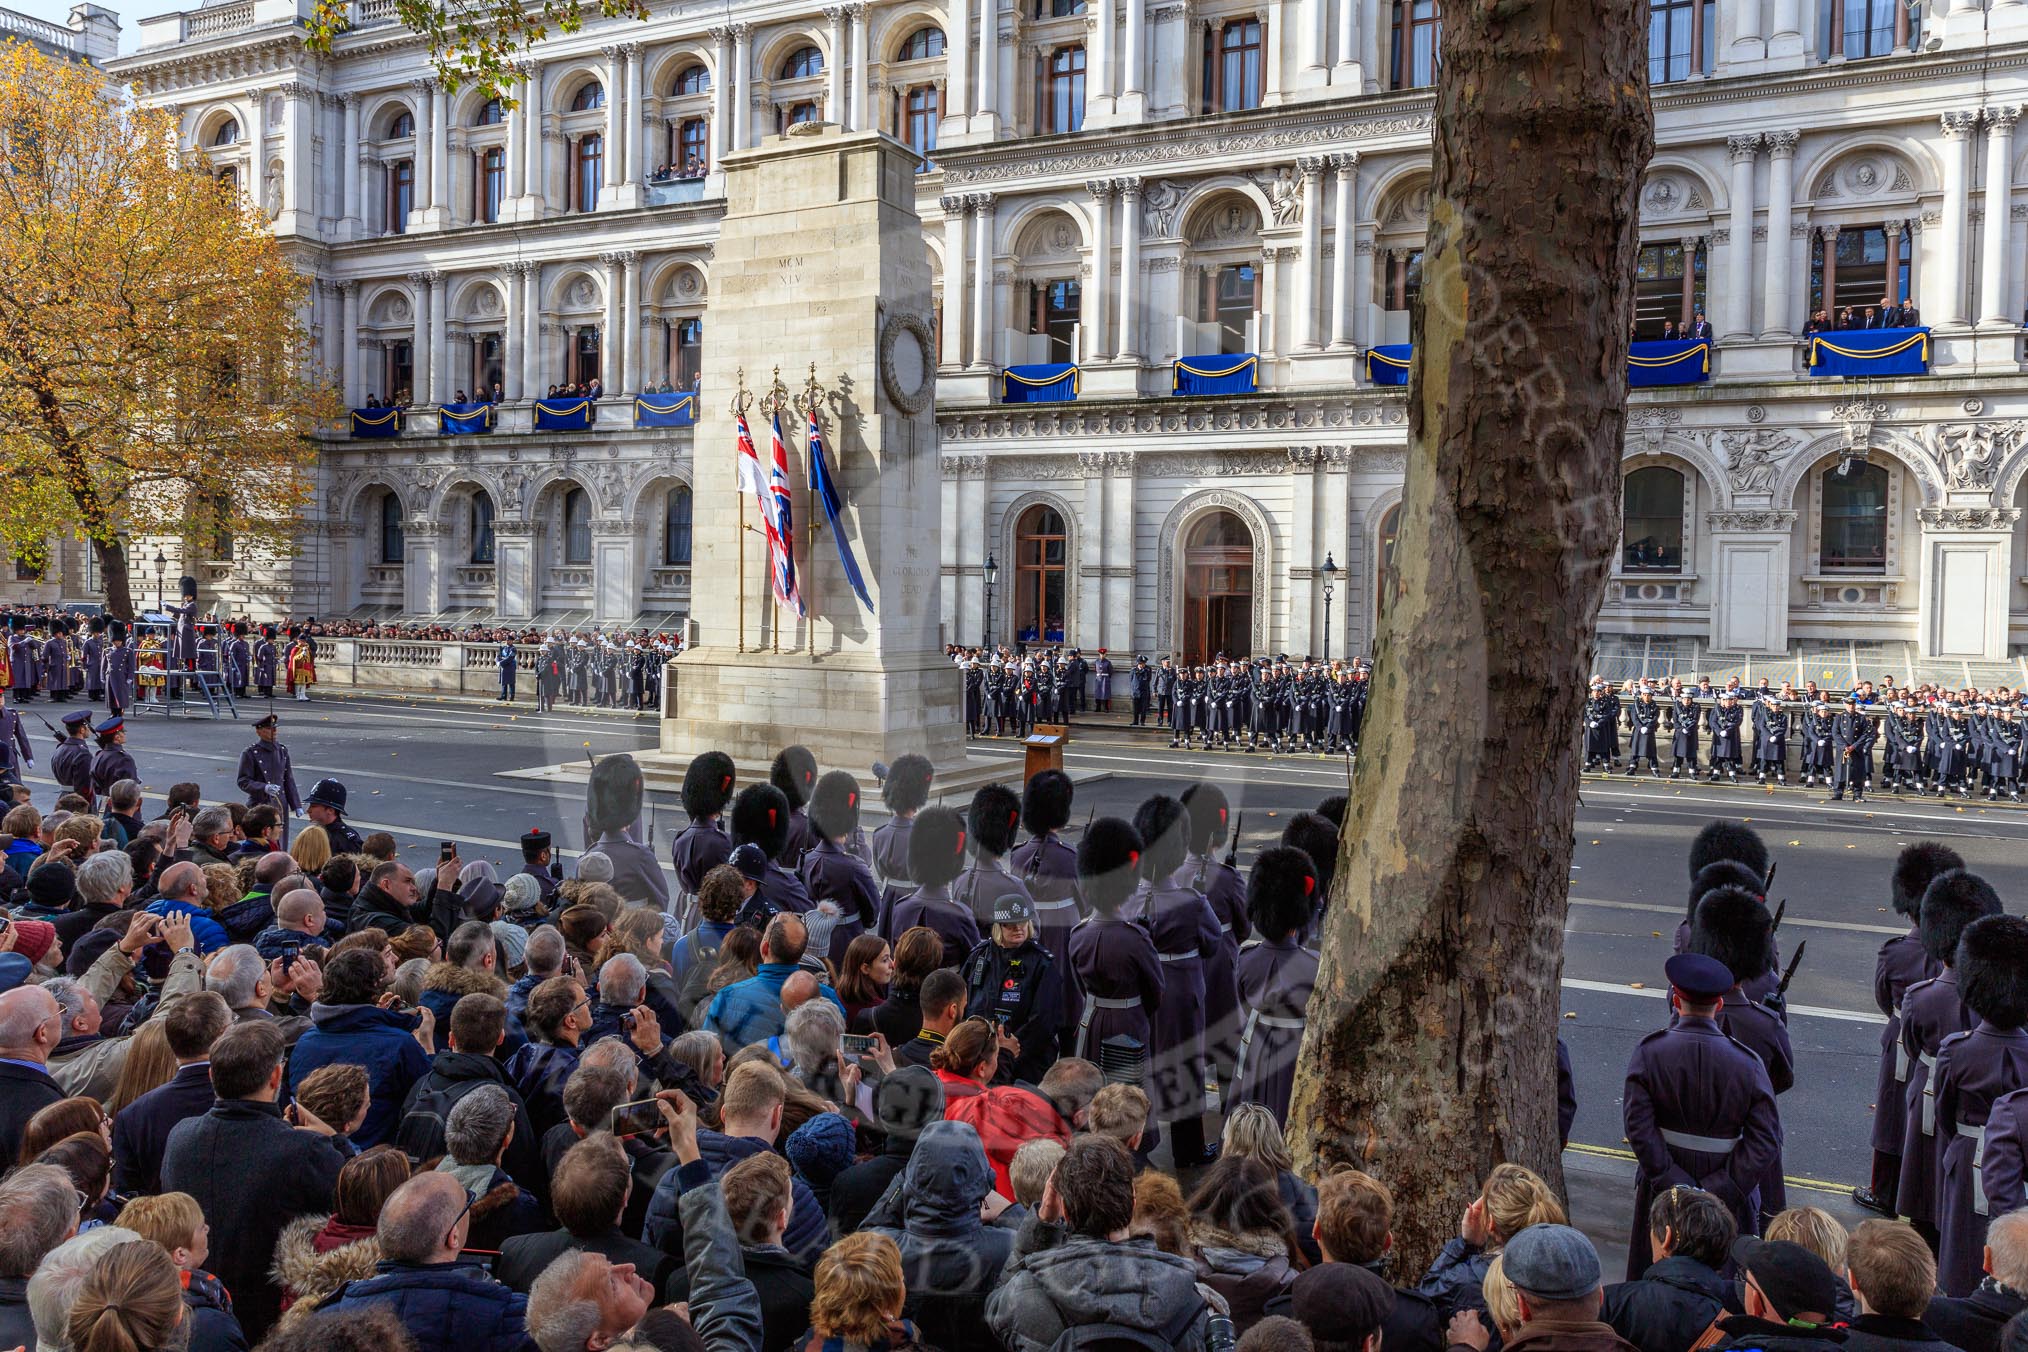 Whitehall with the Cenotaph 32 minutes before the start of the Remembrance Sunday Cenotaph Ceremony 2018 at Horse Guards Parade, Westminster, London, 11 November 2018, 10:28.